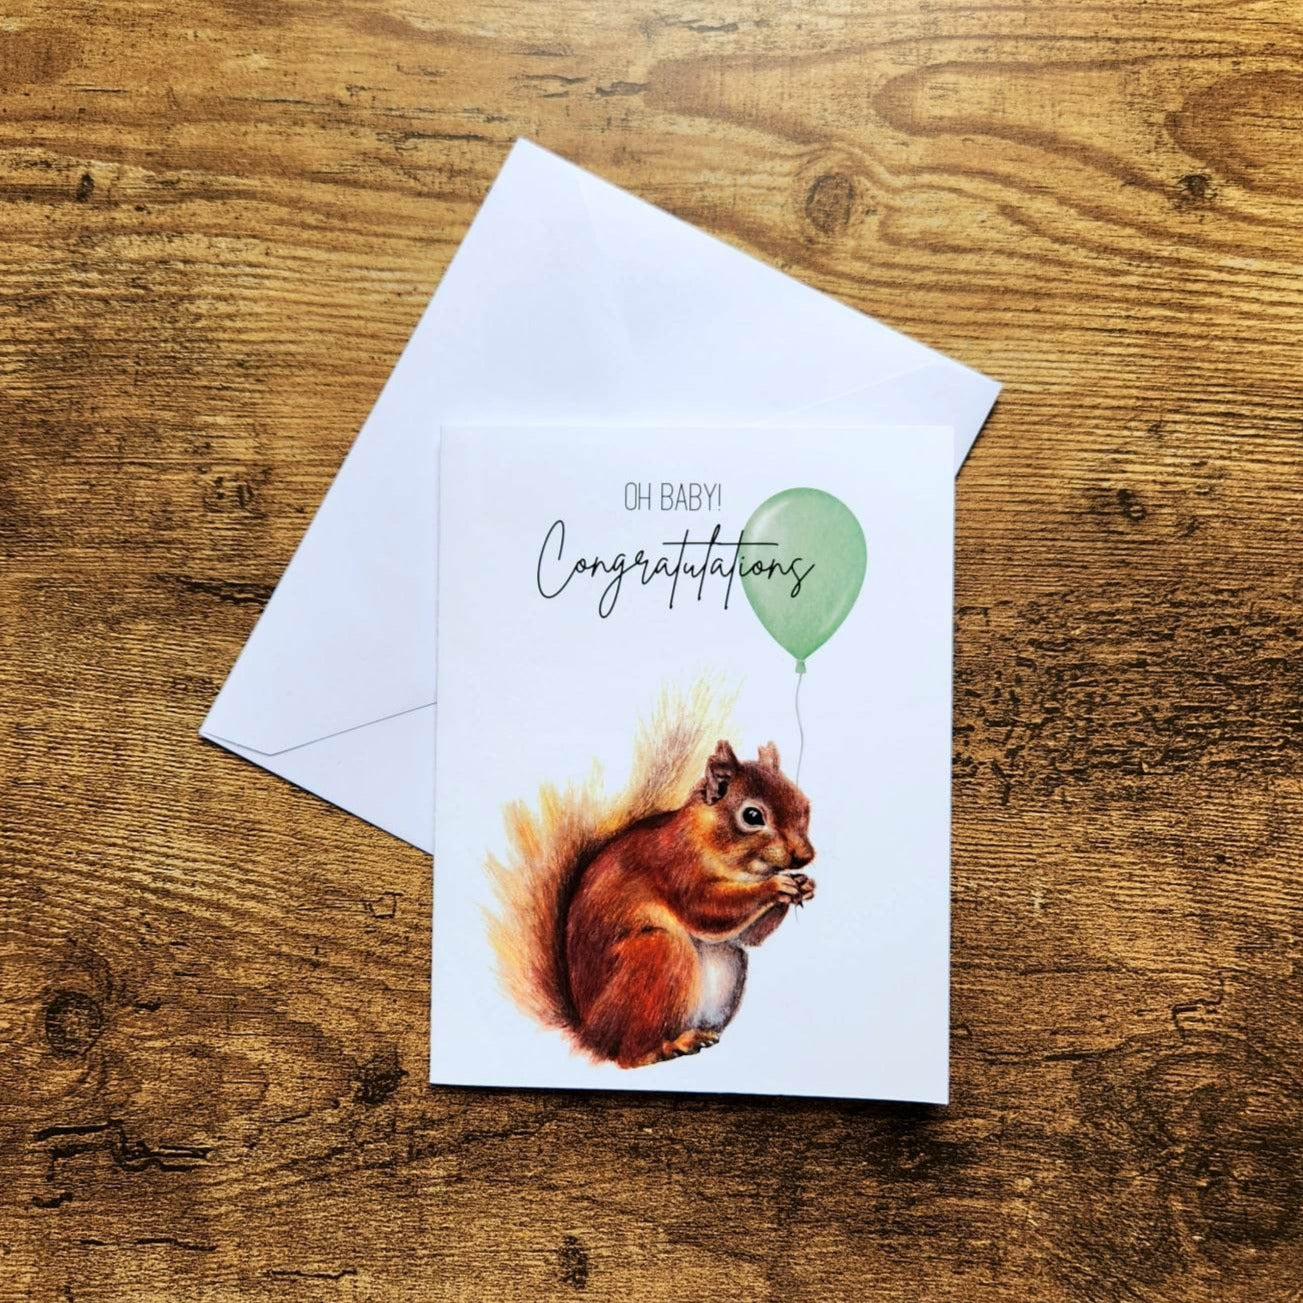 Gender neutral baby shower card, Pregnancy congratulations card, Woodland animal baby shower card, Congrats mama card, New parents card